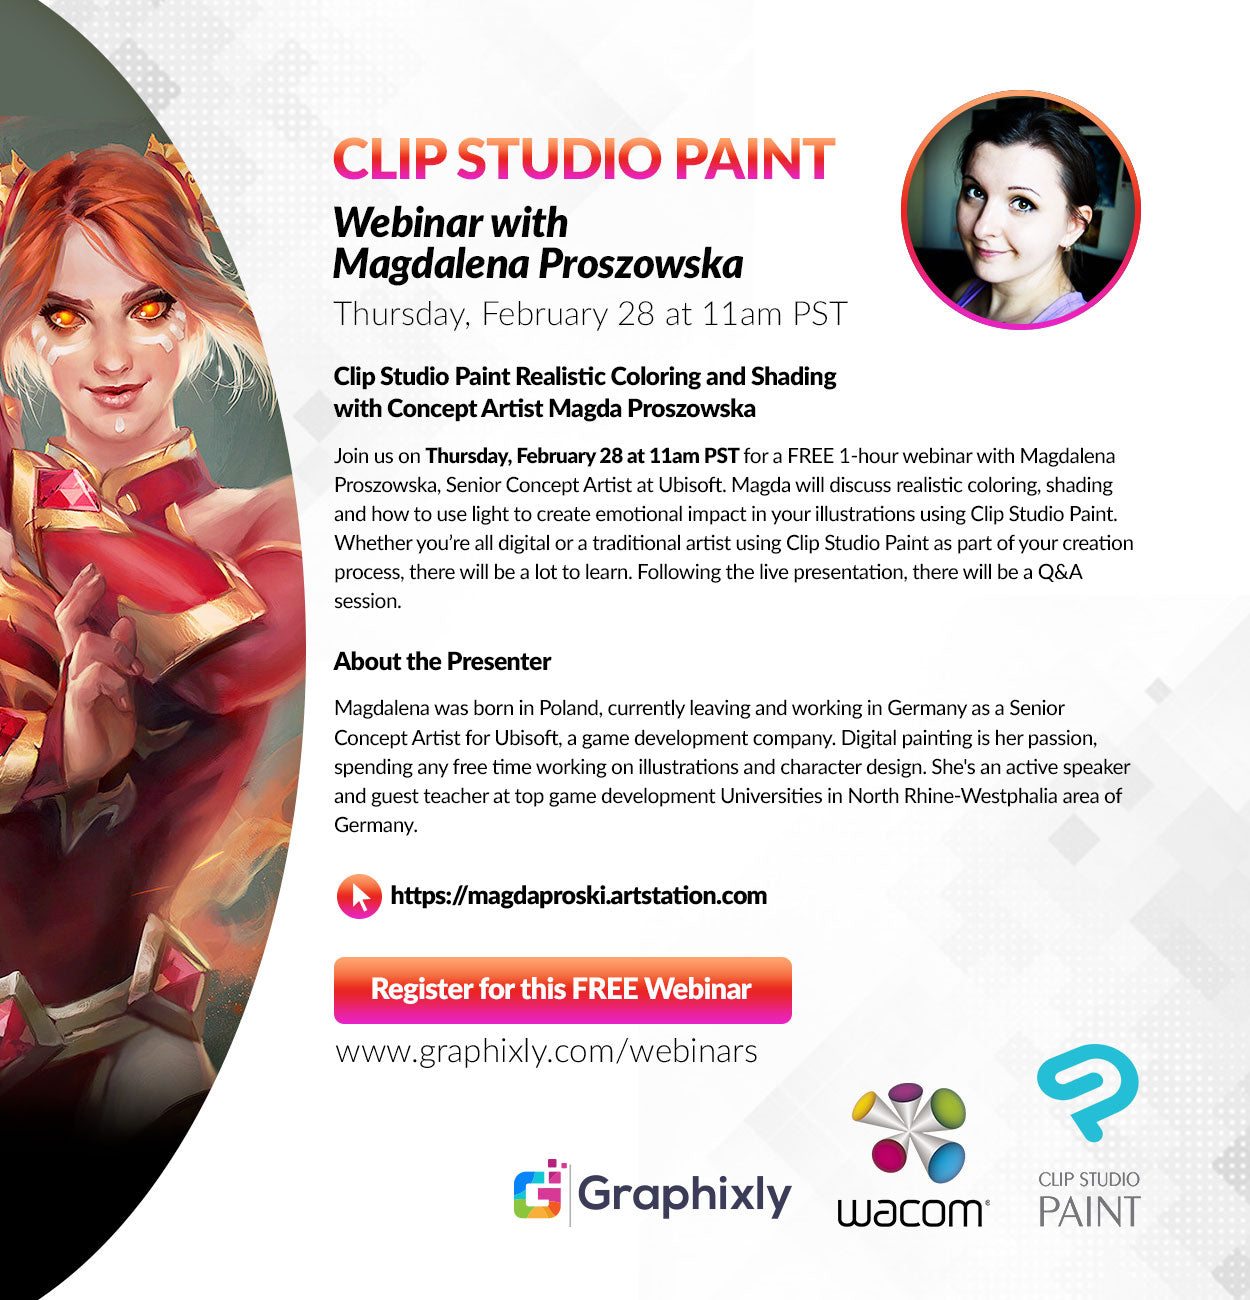 Webinar - Clip Studio Paint Realistic Coloring and Shading with Concept Artist Magda Proszowska